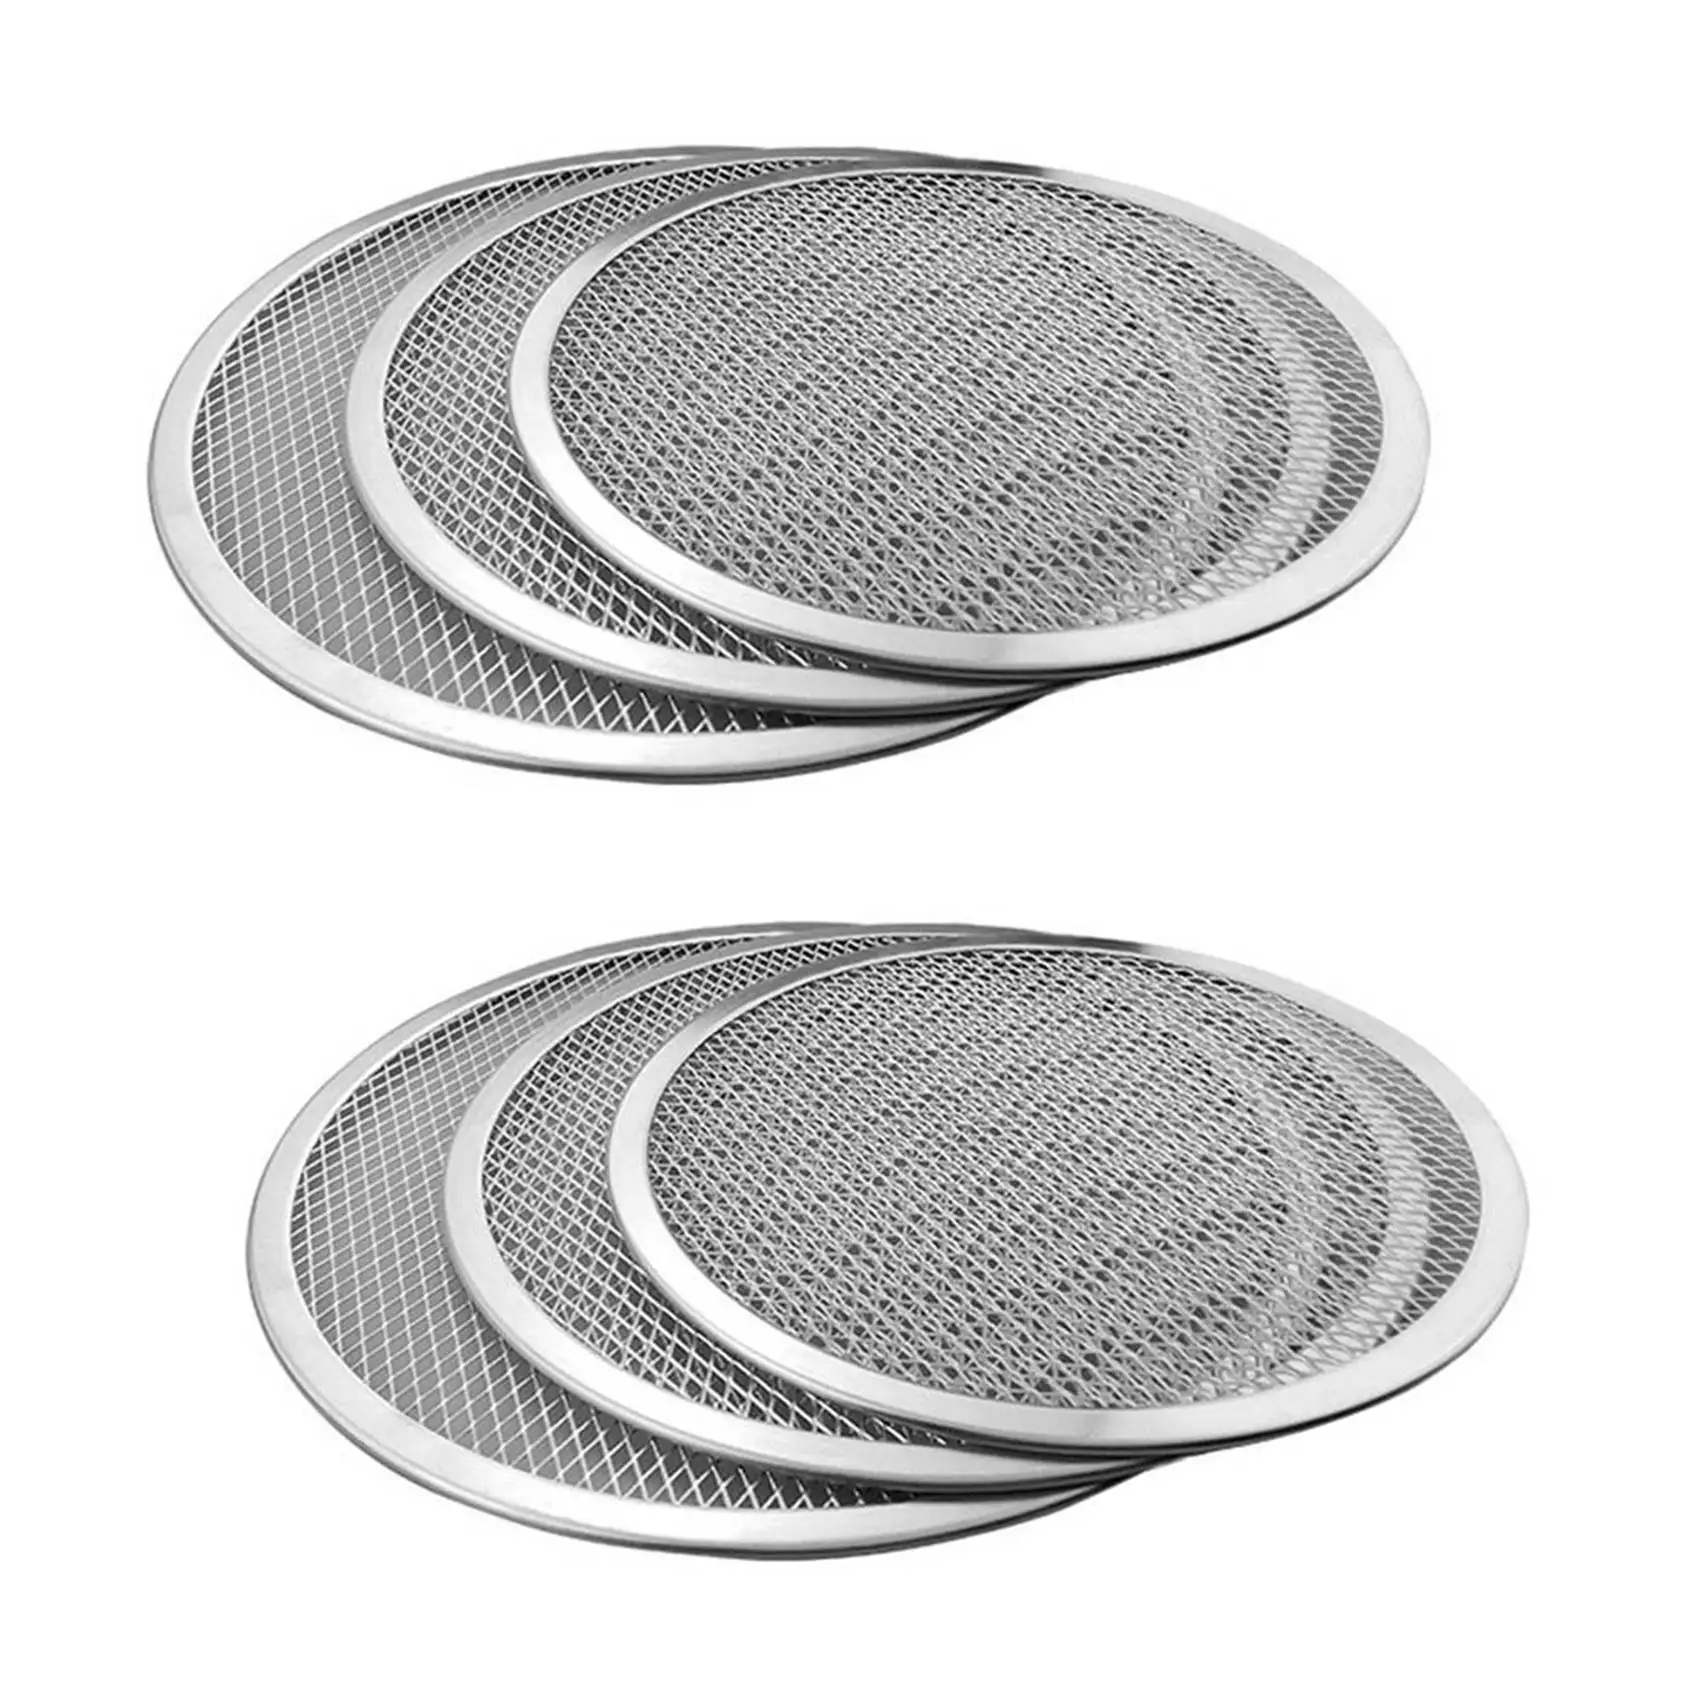 

2X Professional Round Pizza Oven Baking Tray Barbecue Grate Nonstick Mesh Net(14 Inch)